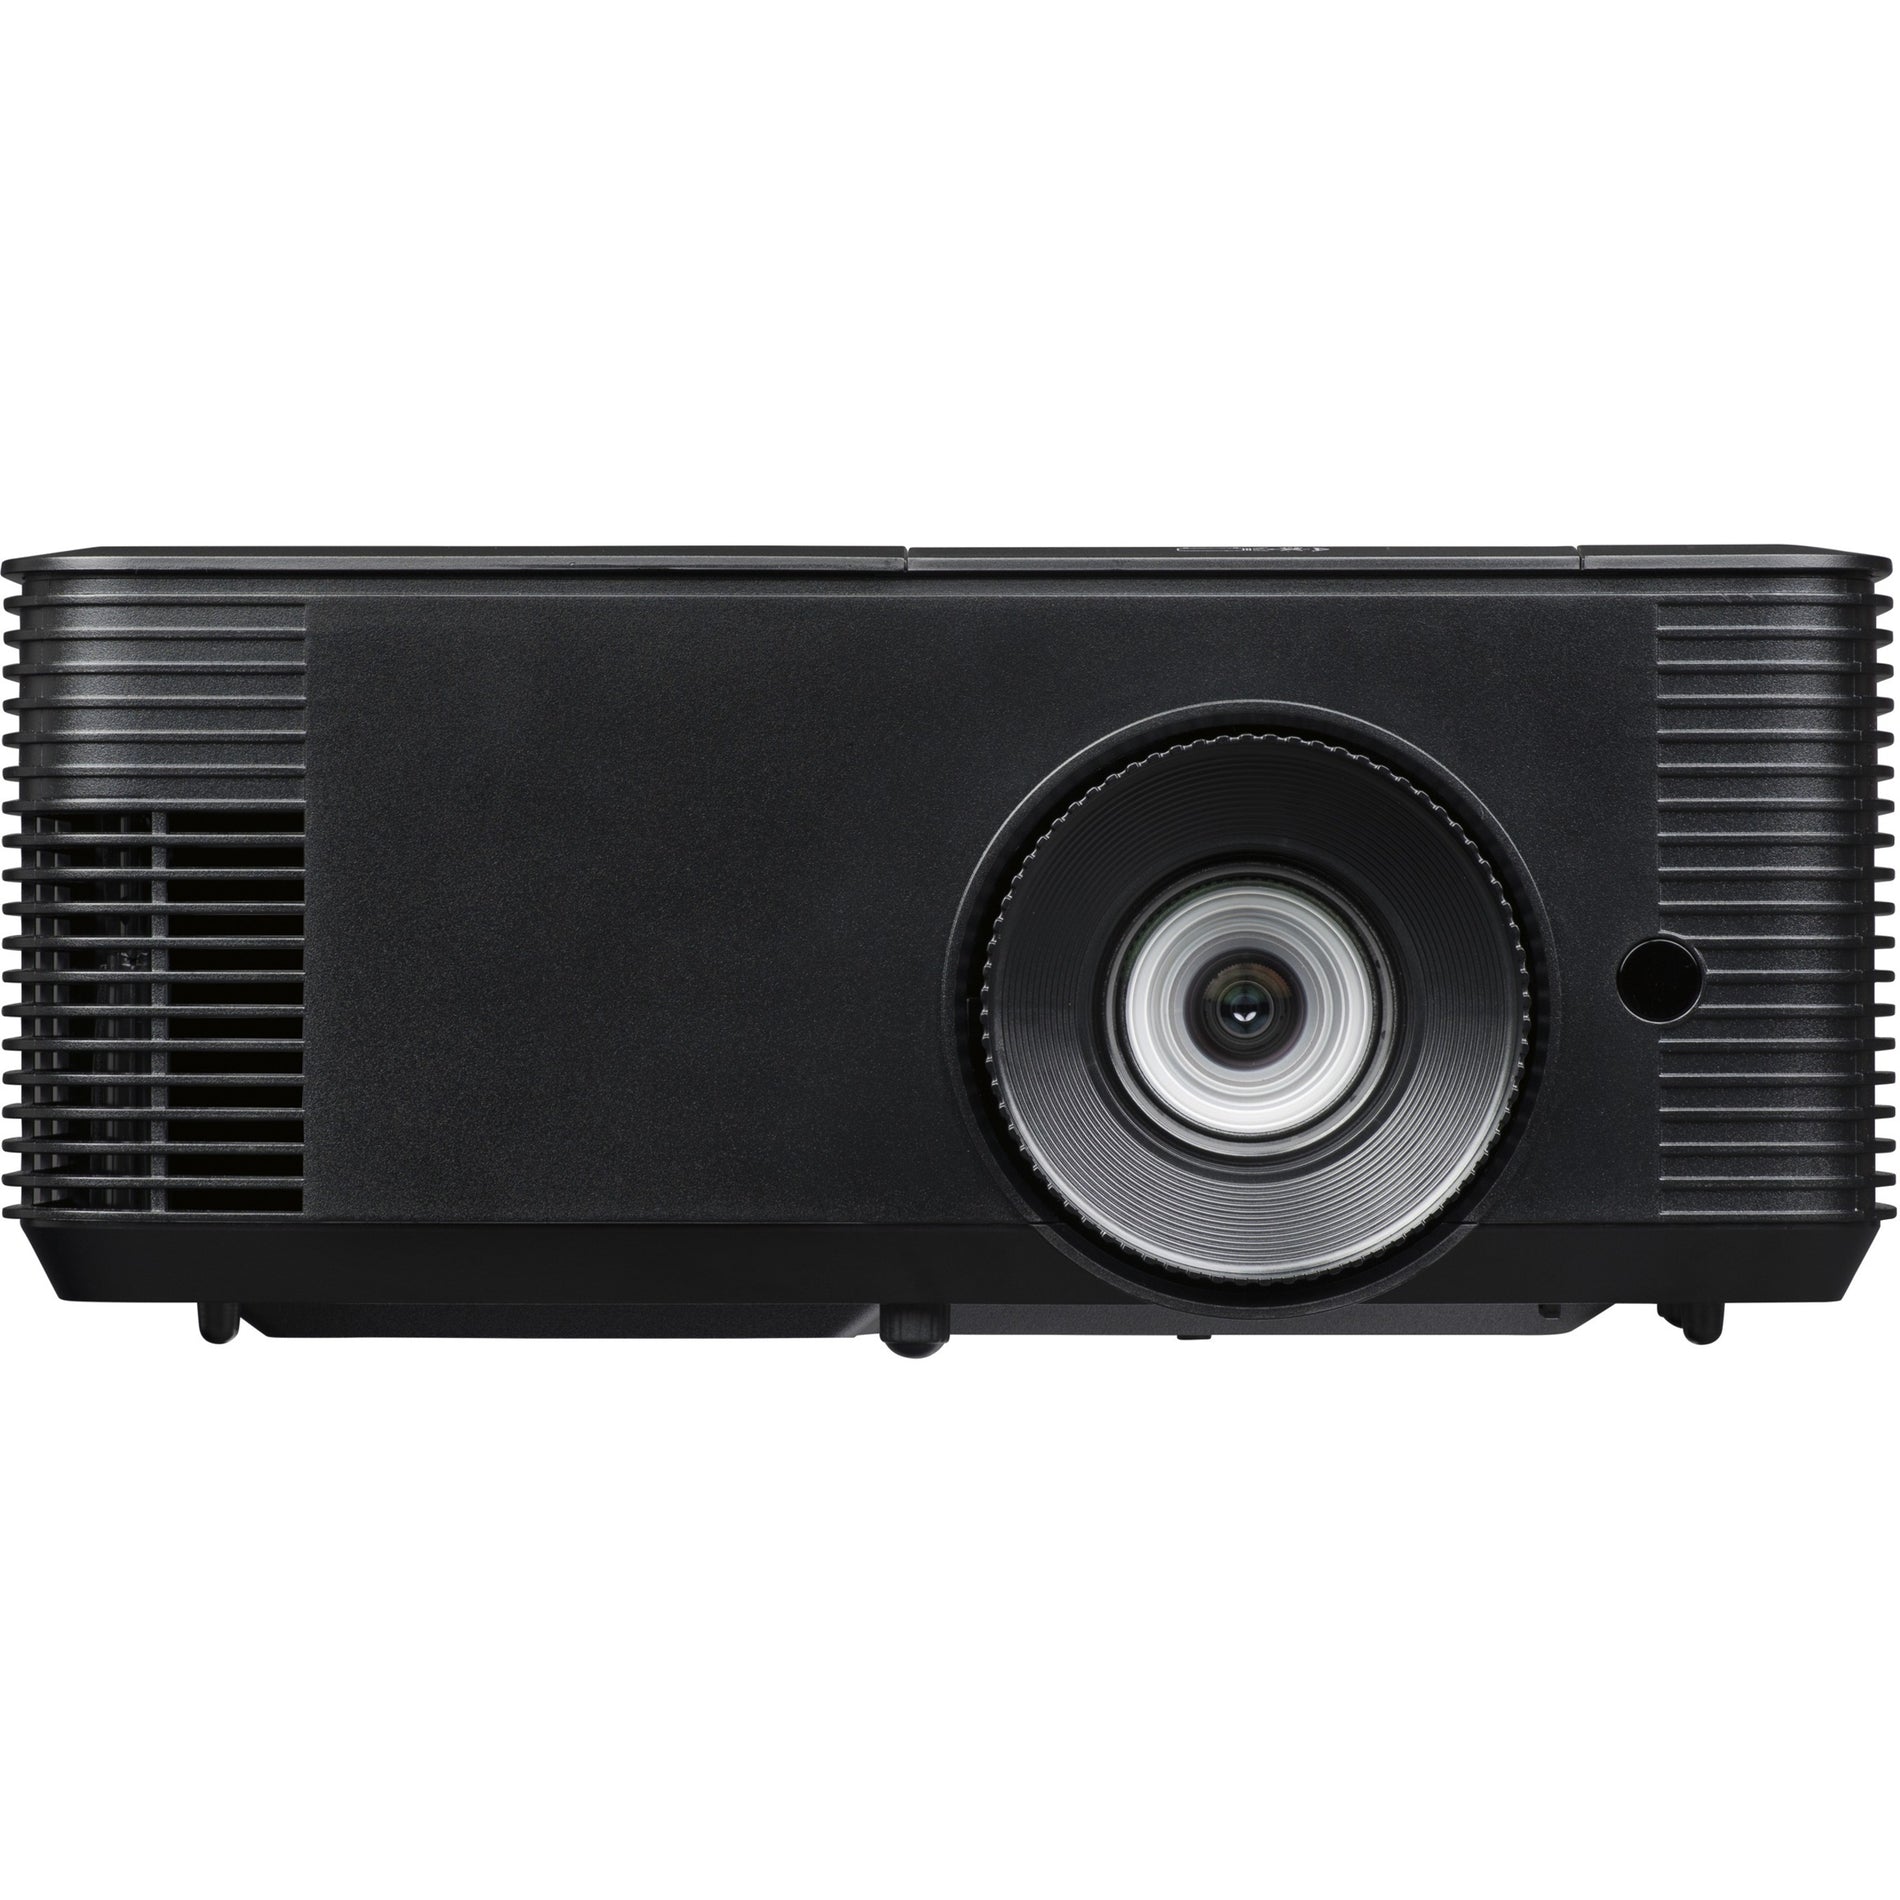 InFocus IN2138HD DLP Projector, Full HD, 4500 lm, Long Throw